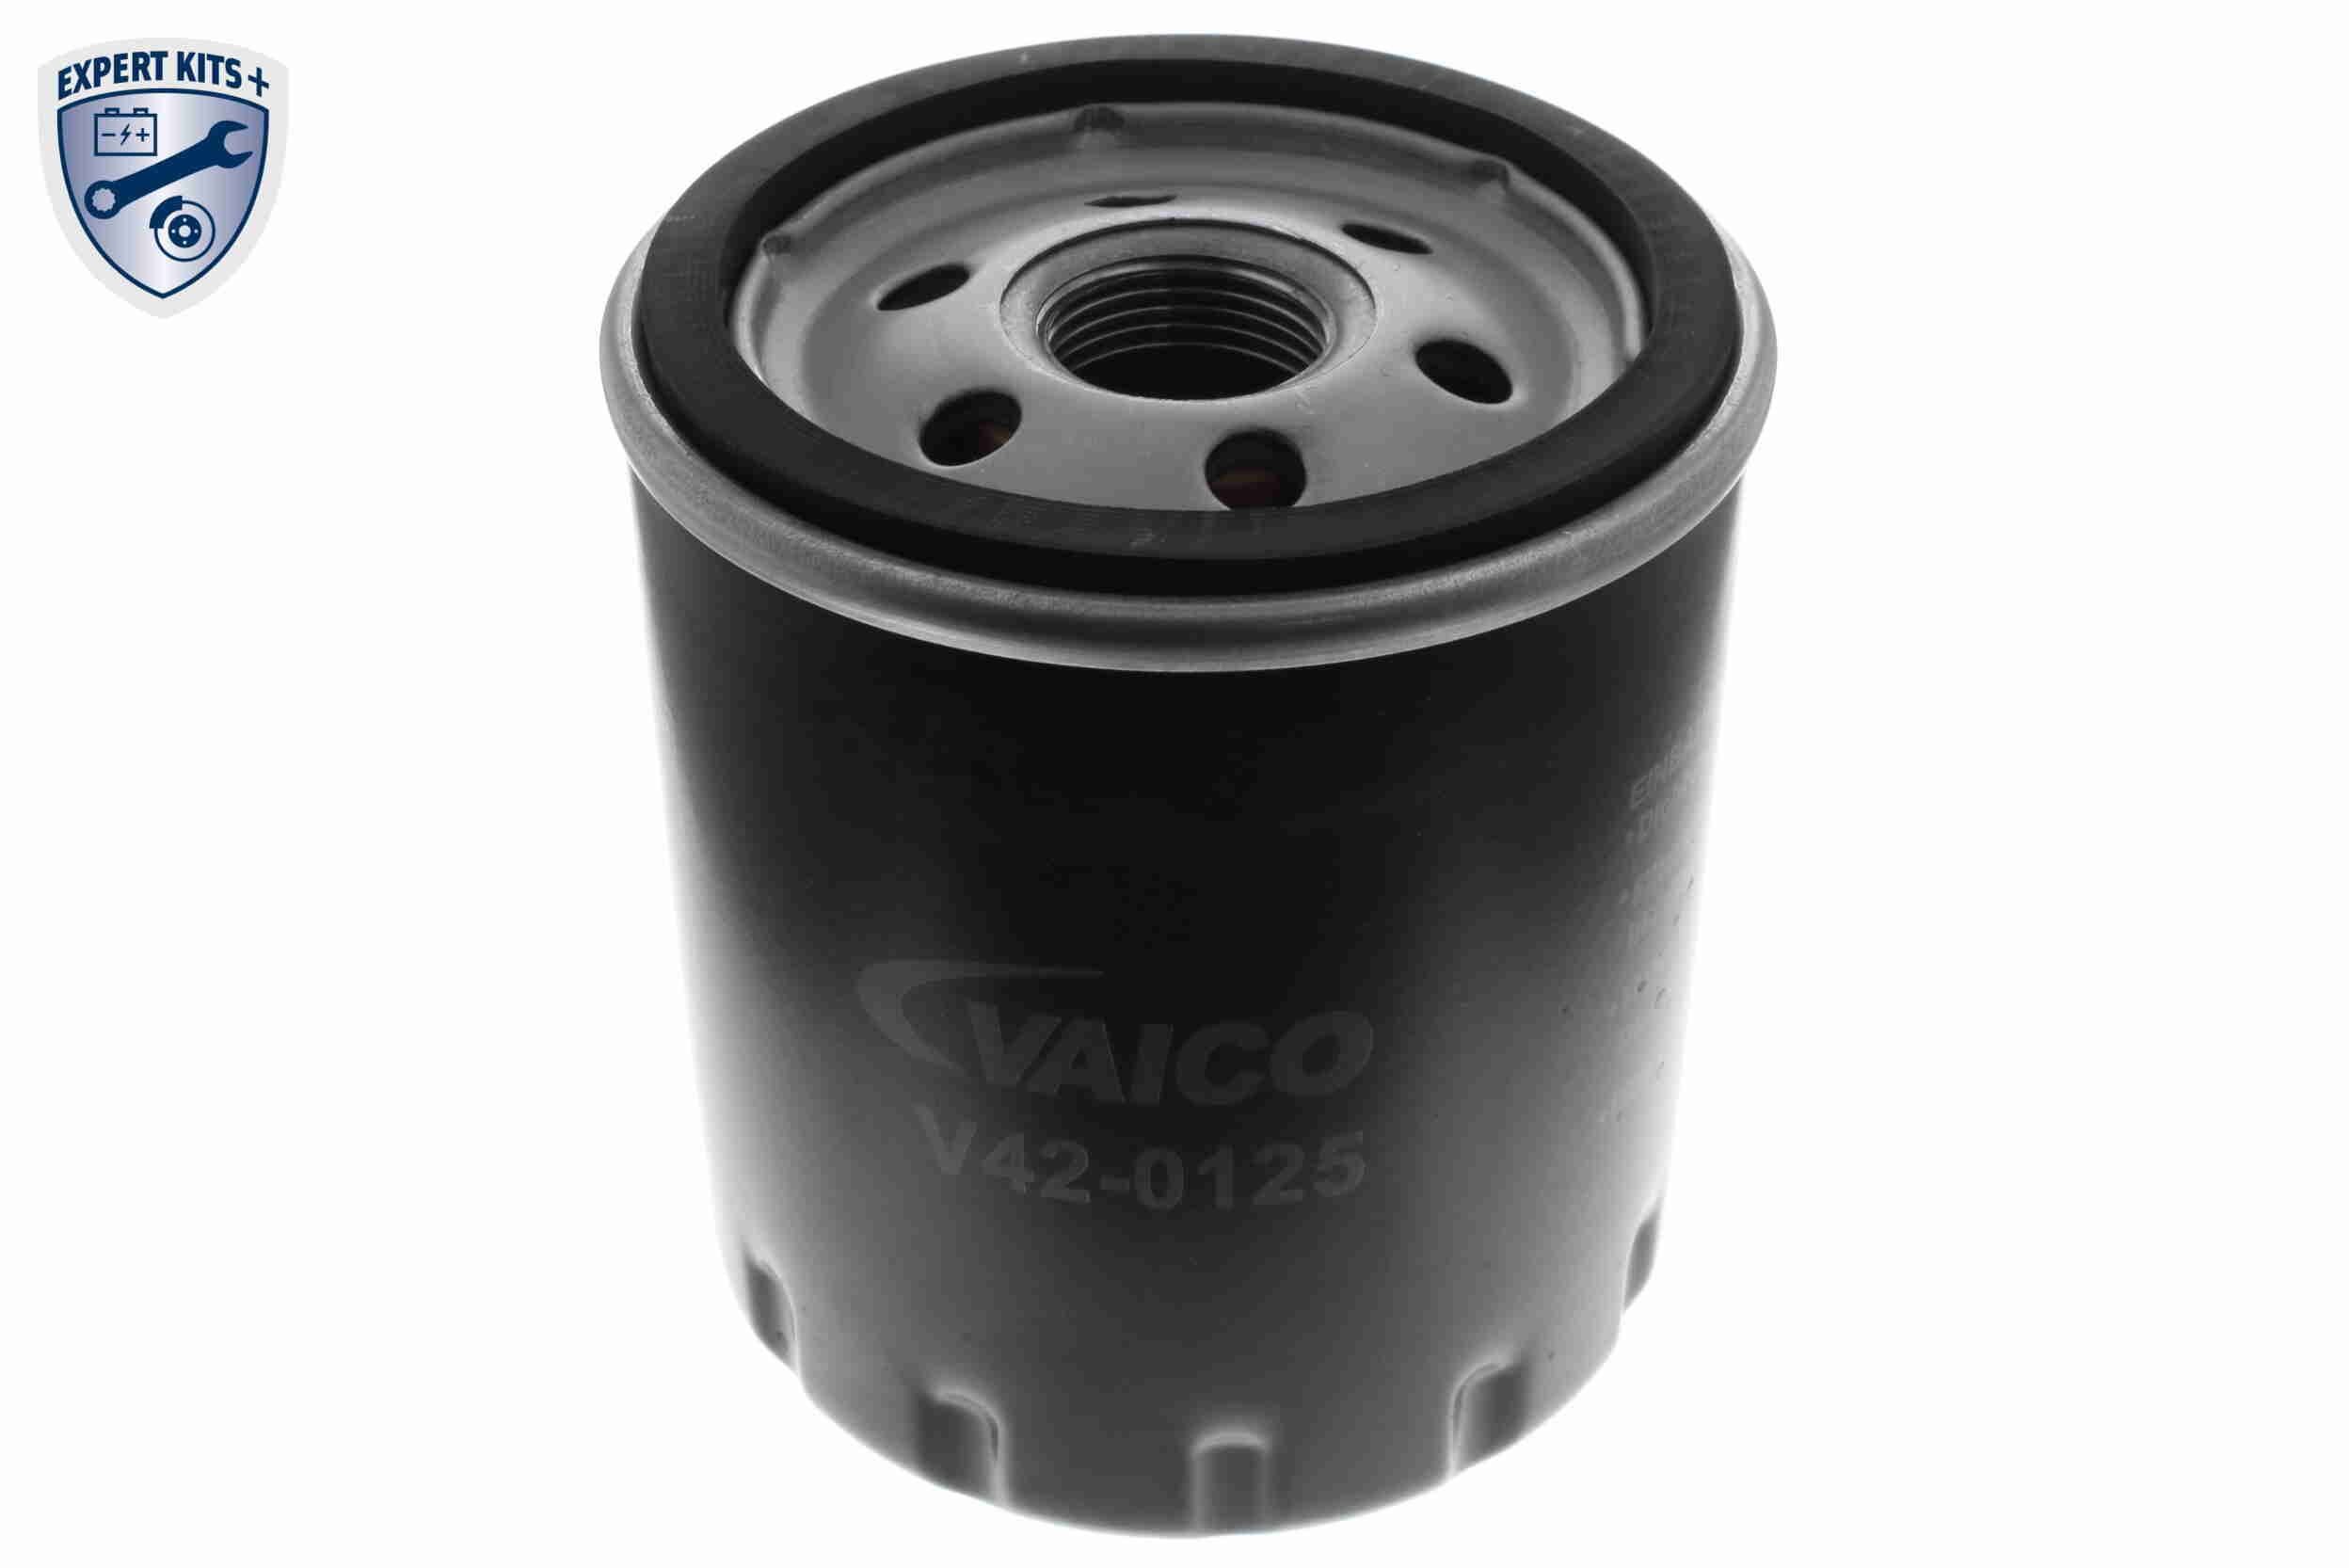 V220886 Timing belt pulley kit EXPERT KITS + VAICO V22-0886 review and test